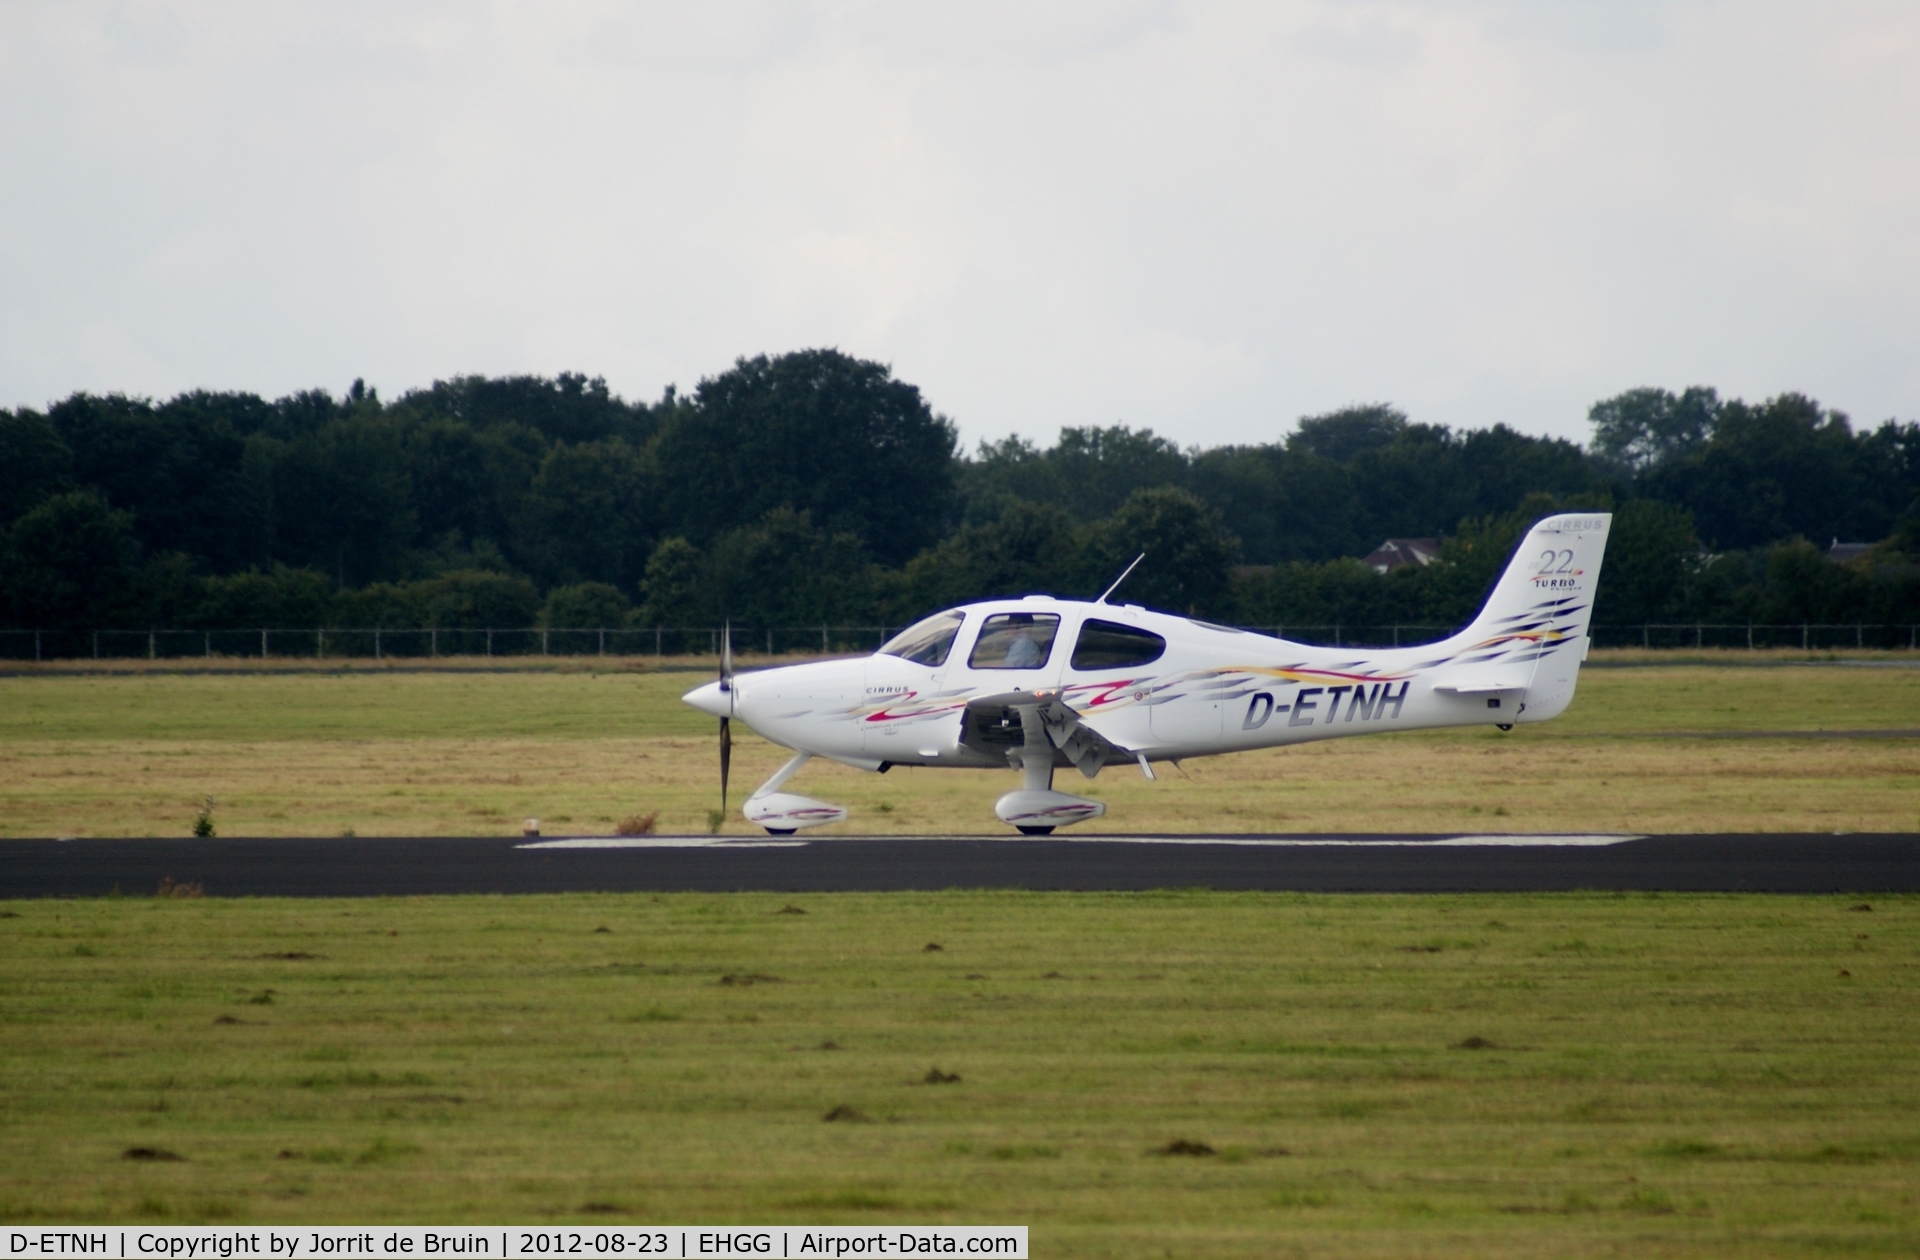 D-ETNH, 2007 Cirrus SR22 SE Turbo C/N 2216, About to fly back after a stop on Eelde airport.